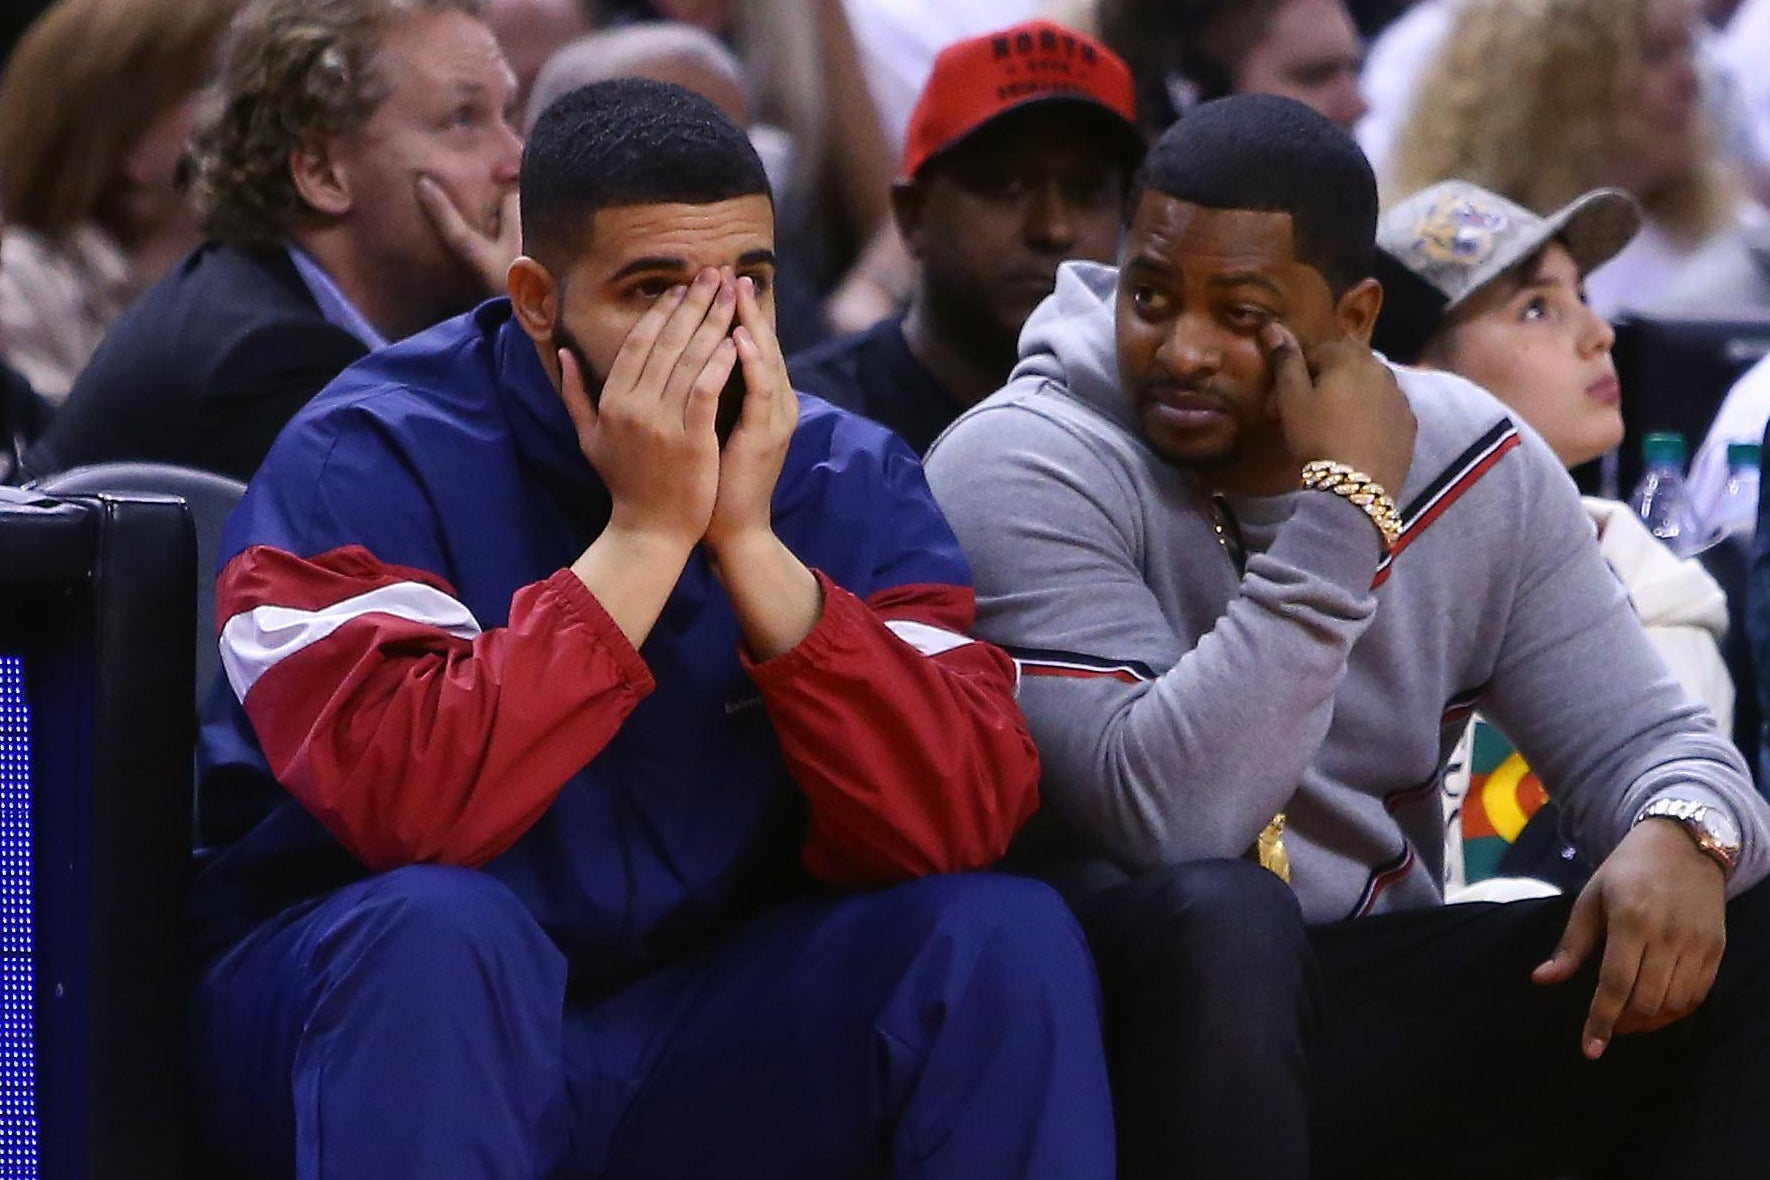 Drake looks on from his court side seat in the second half of Game Two of the Eastern Conference Semifinals between the Cleveland Cavaliers and the Toronto Raptors during the 2018 NBA Playoffs at Air Canada Centre on May 3, 2018 in Toronto, Canada.  NOTE TO USER: User expressly acknowledges and agrees that, by downloading and or using this photograph, User is consenting to the terms and conditions of the Getty Images License Agreement.